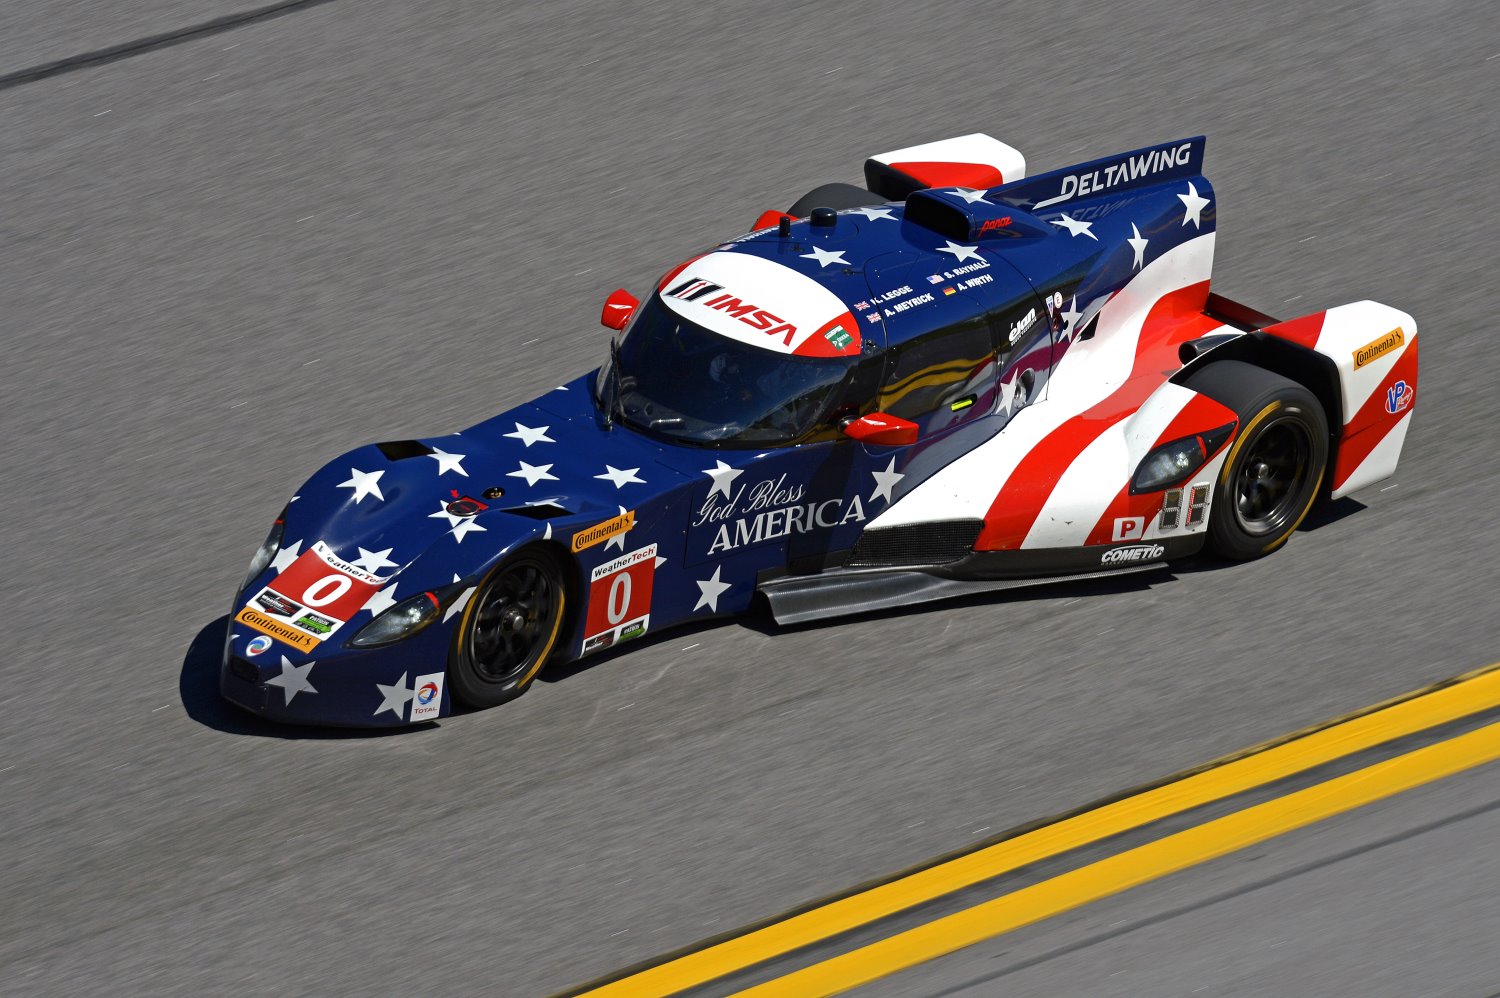 Katherine Legge drives the DeltaWing